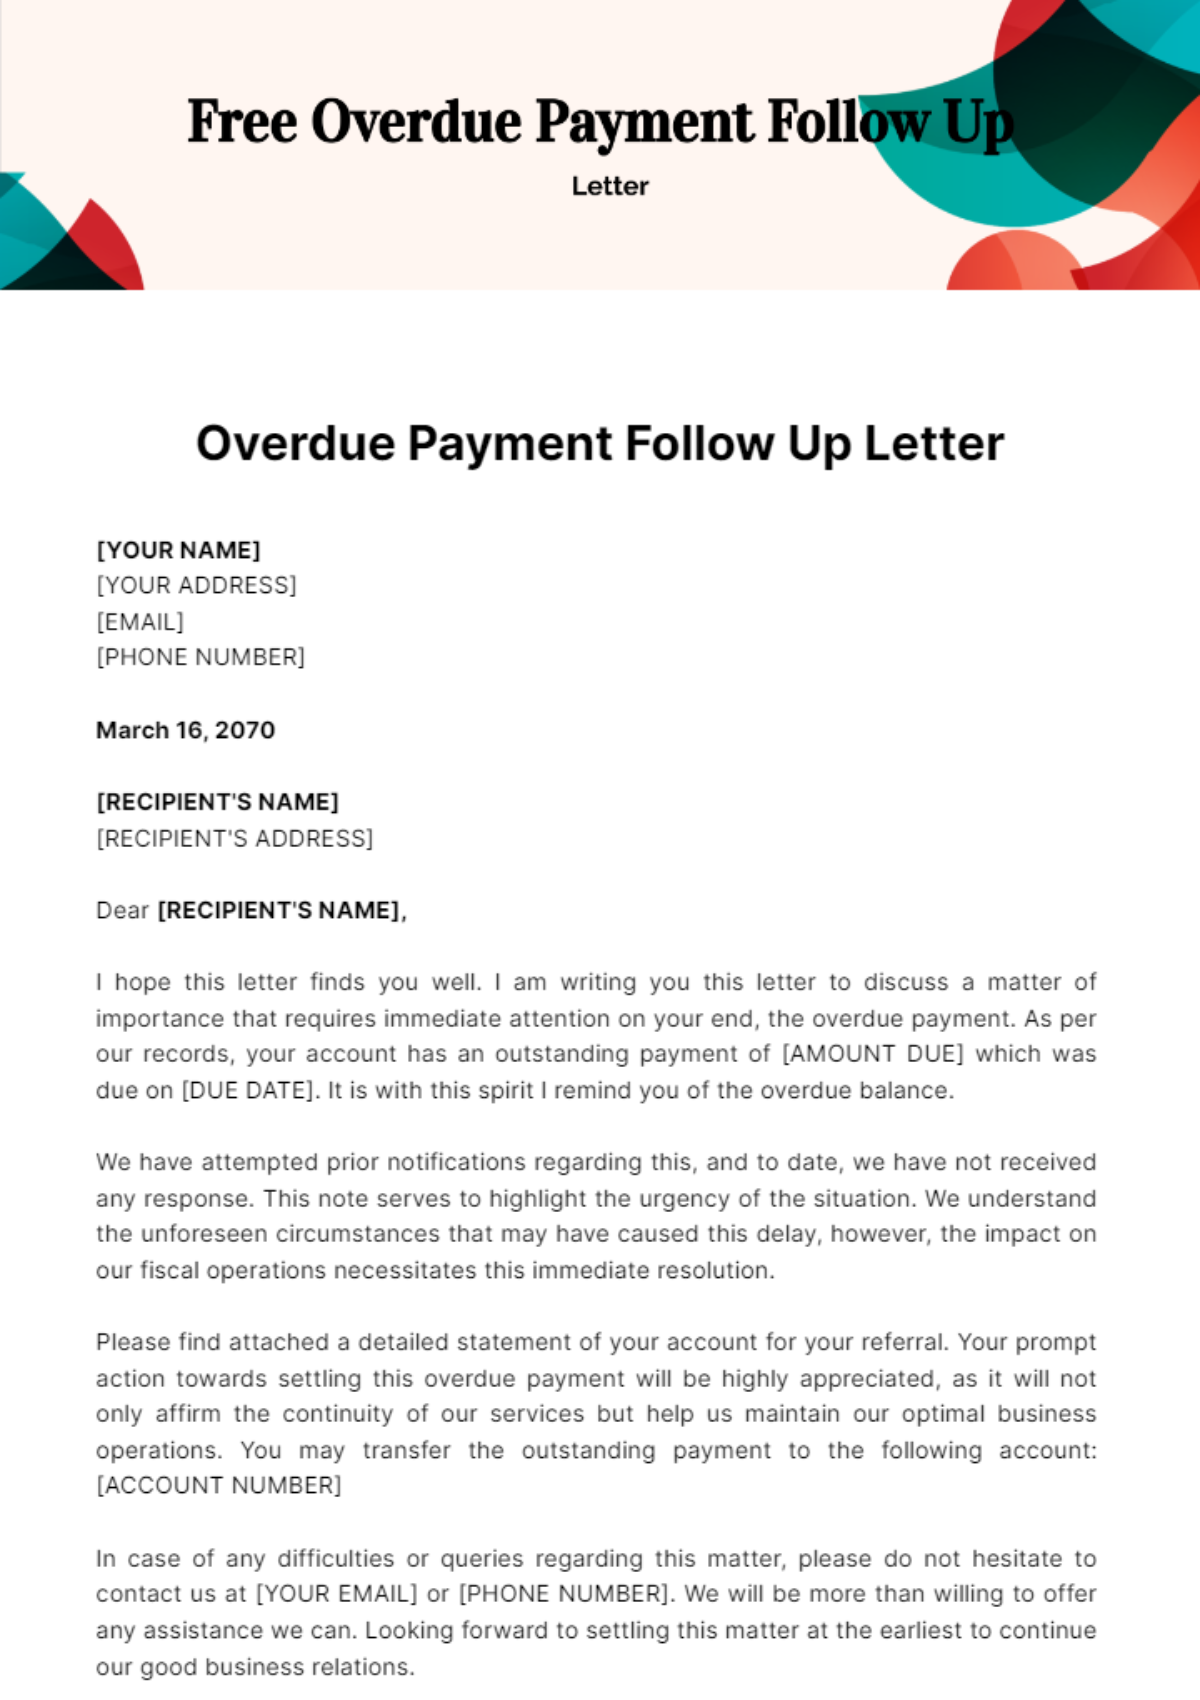 Free Overdue Payment Follow Up Letter Template